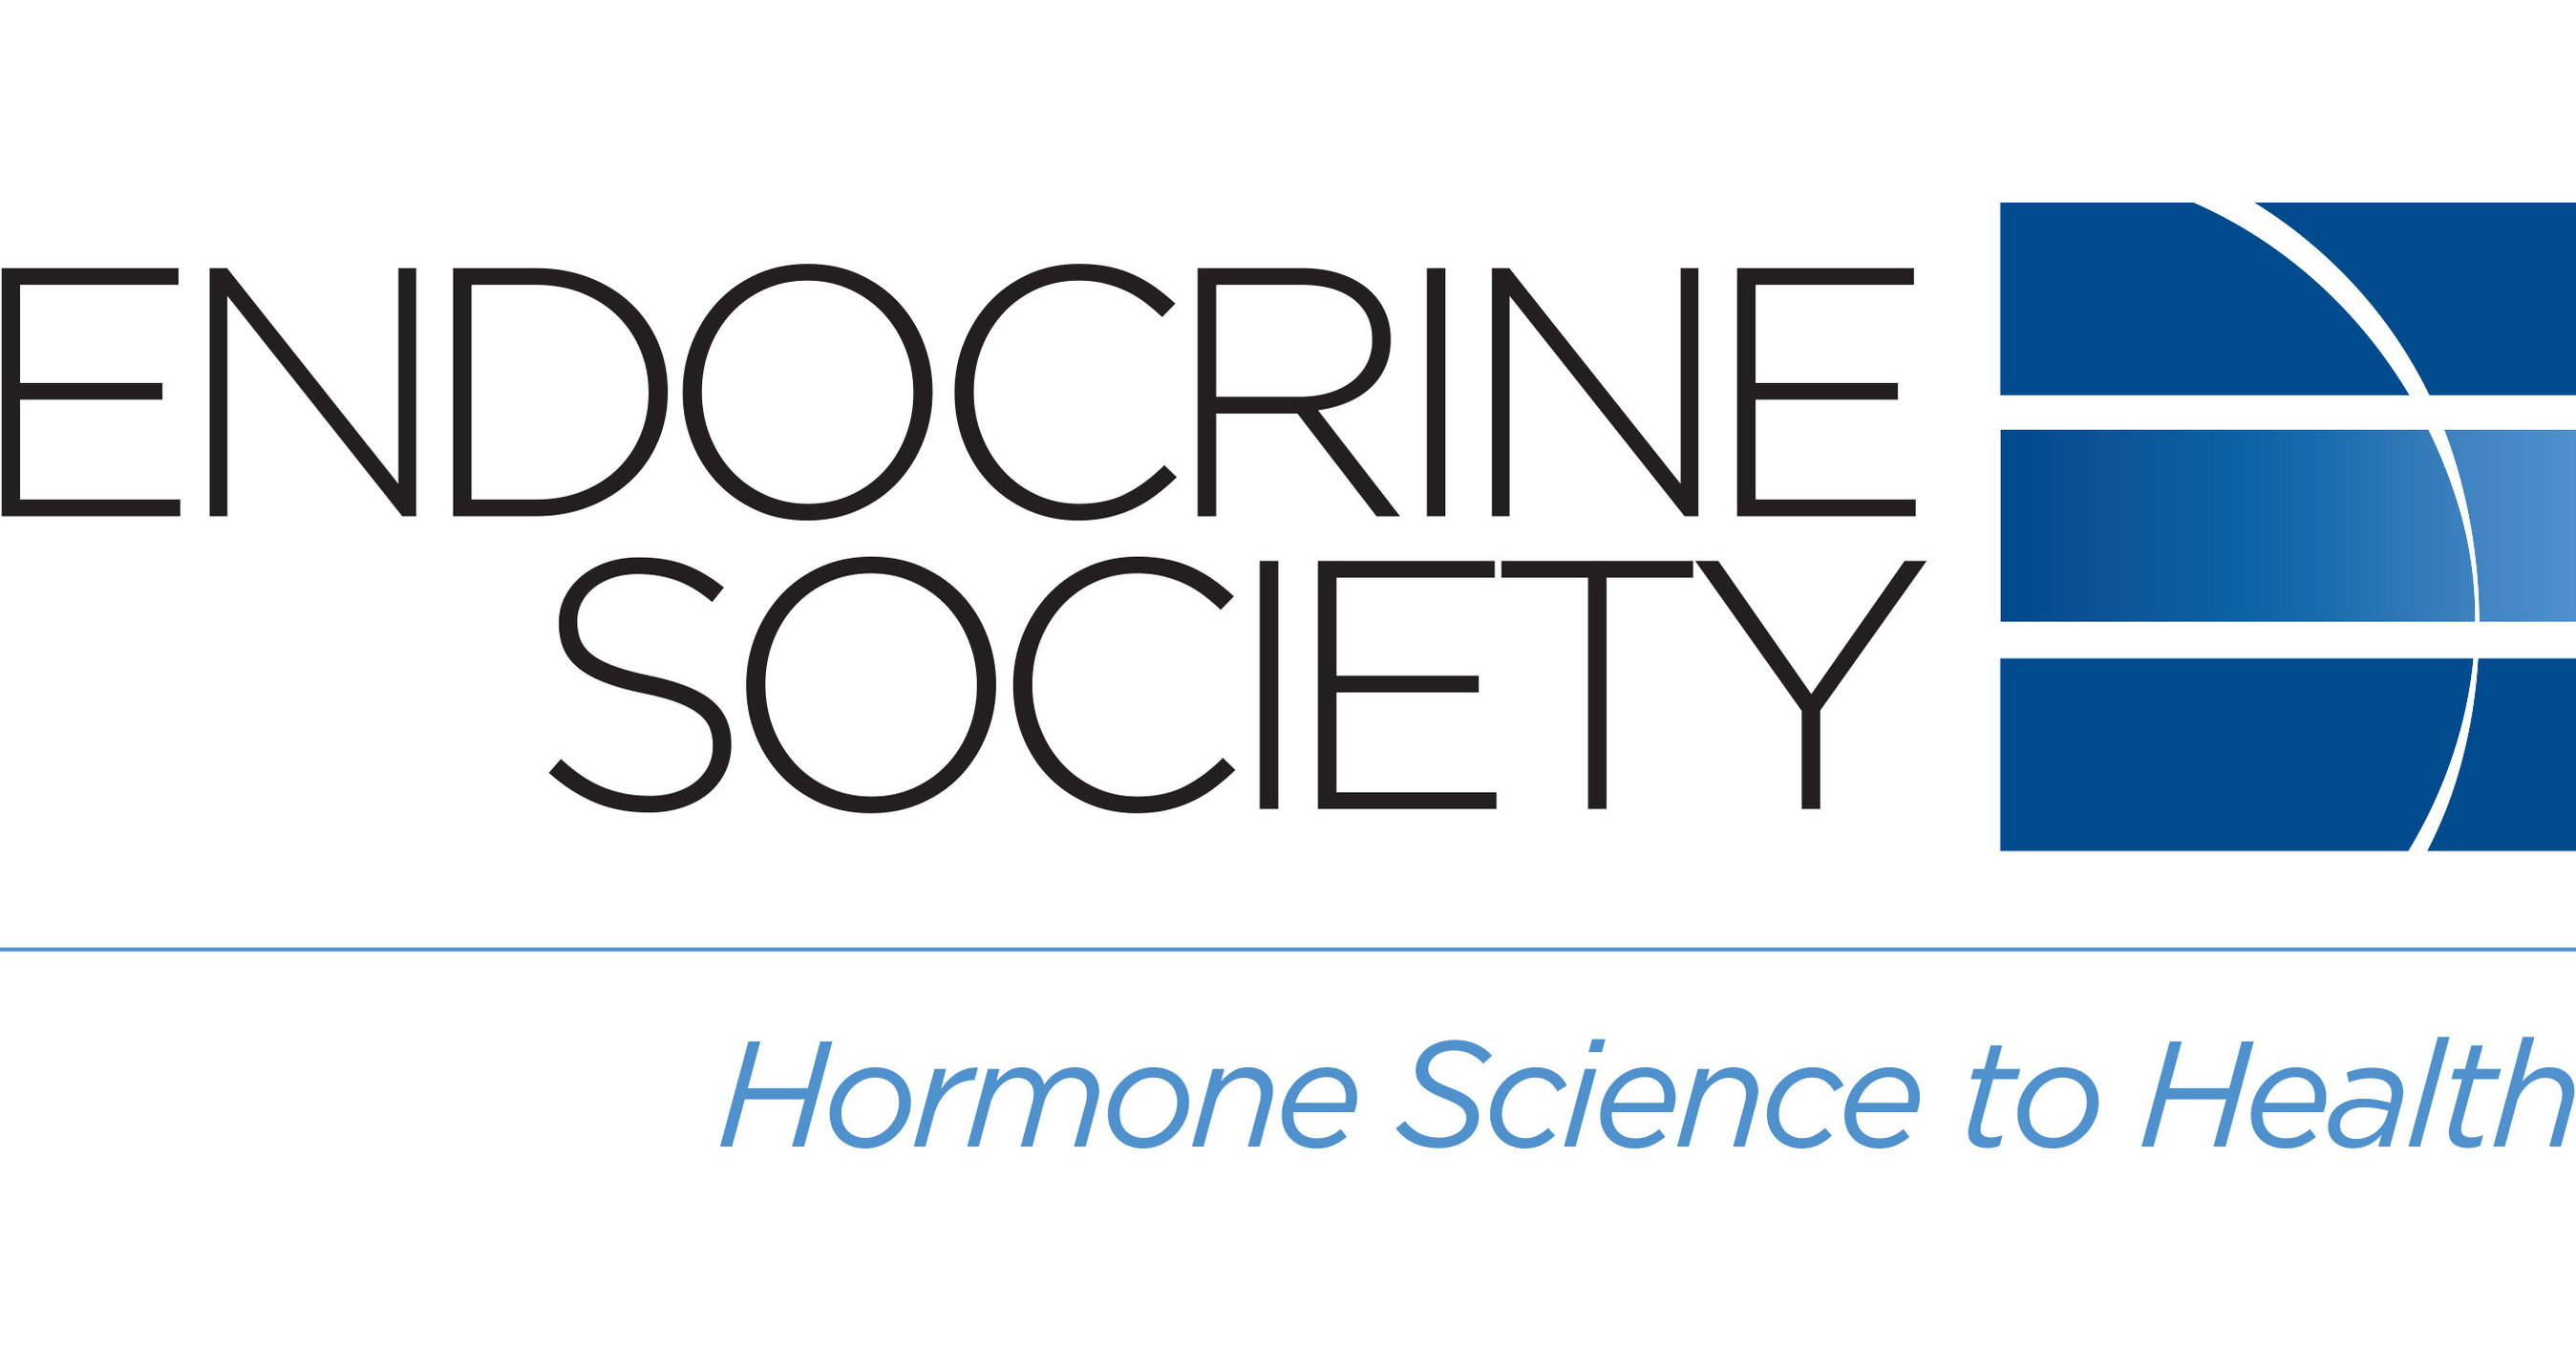 Endocrine Society and Medscape Partner to Bring Endocrine Expertise to